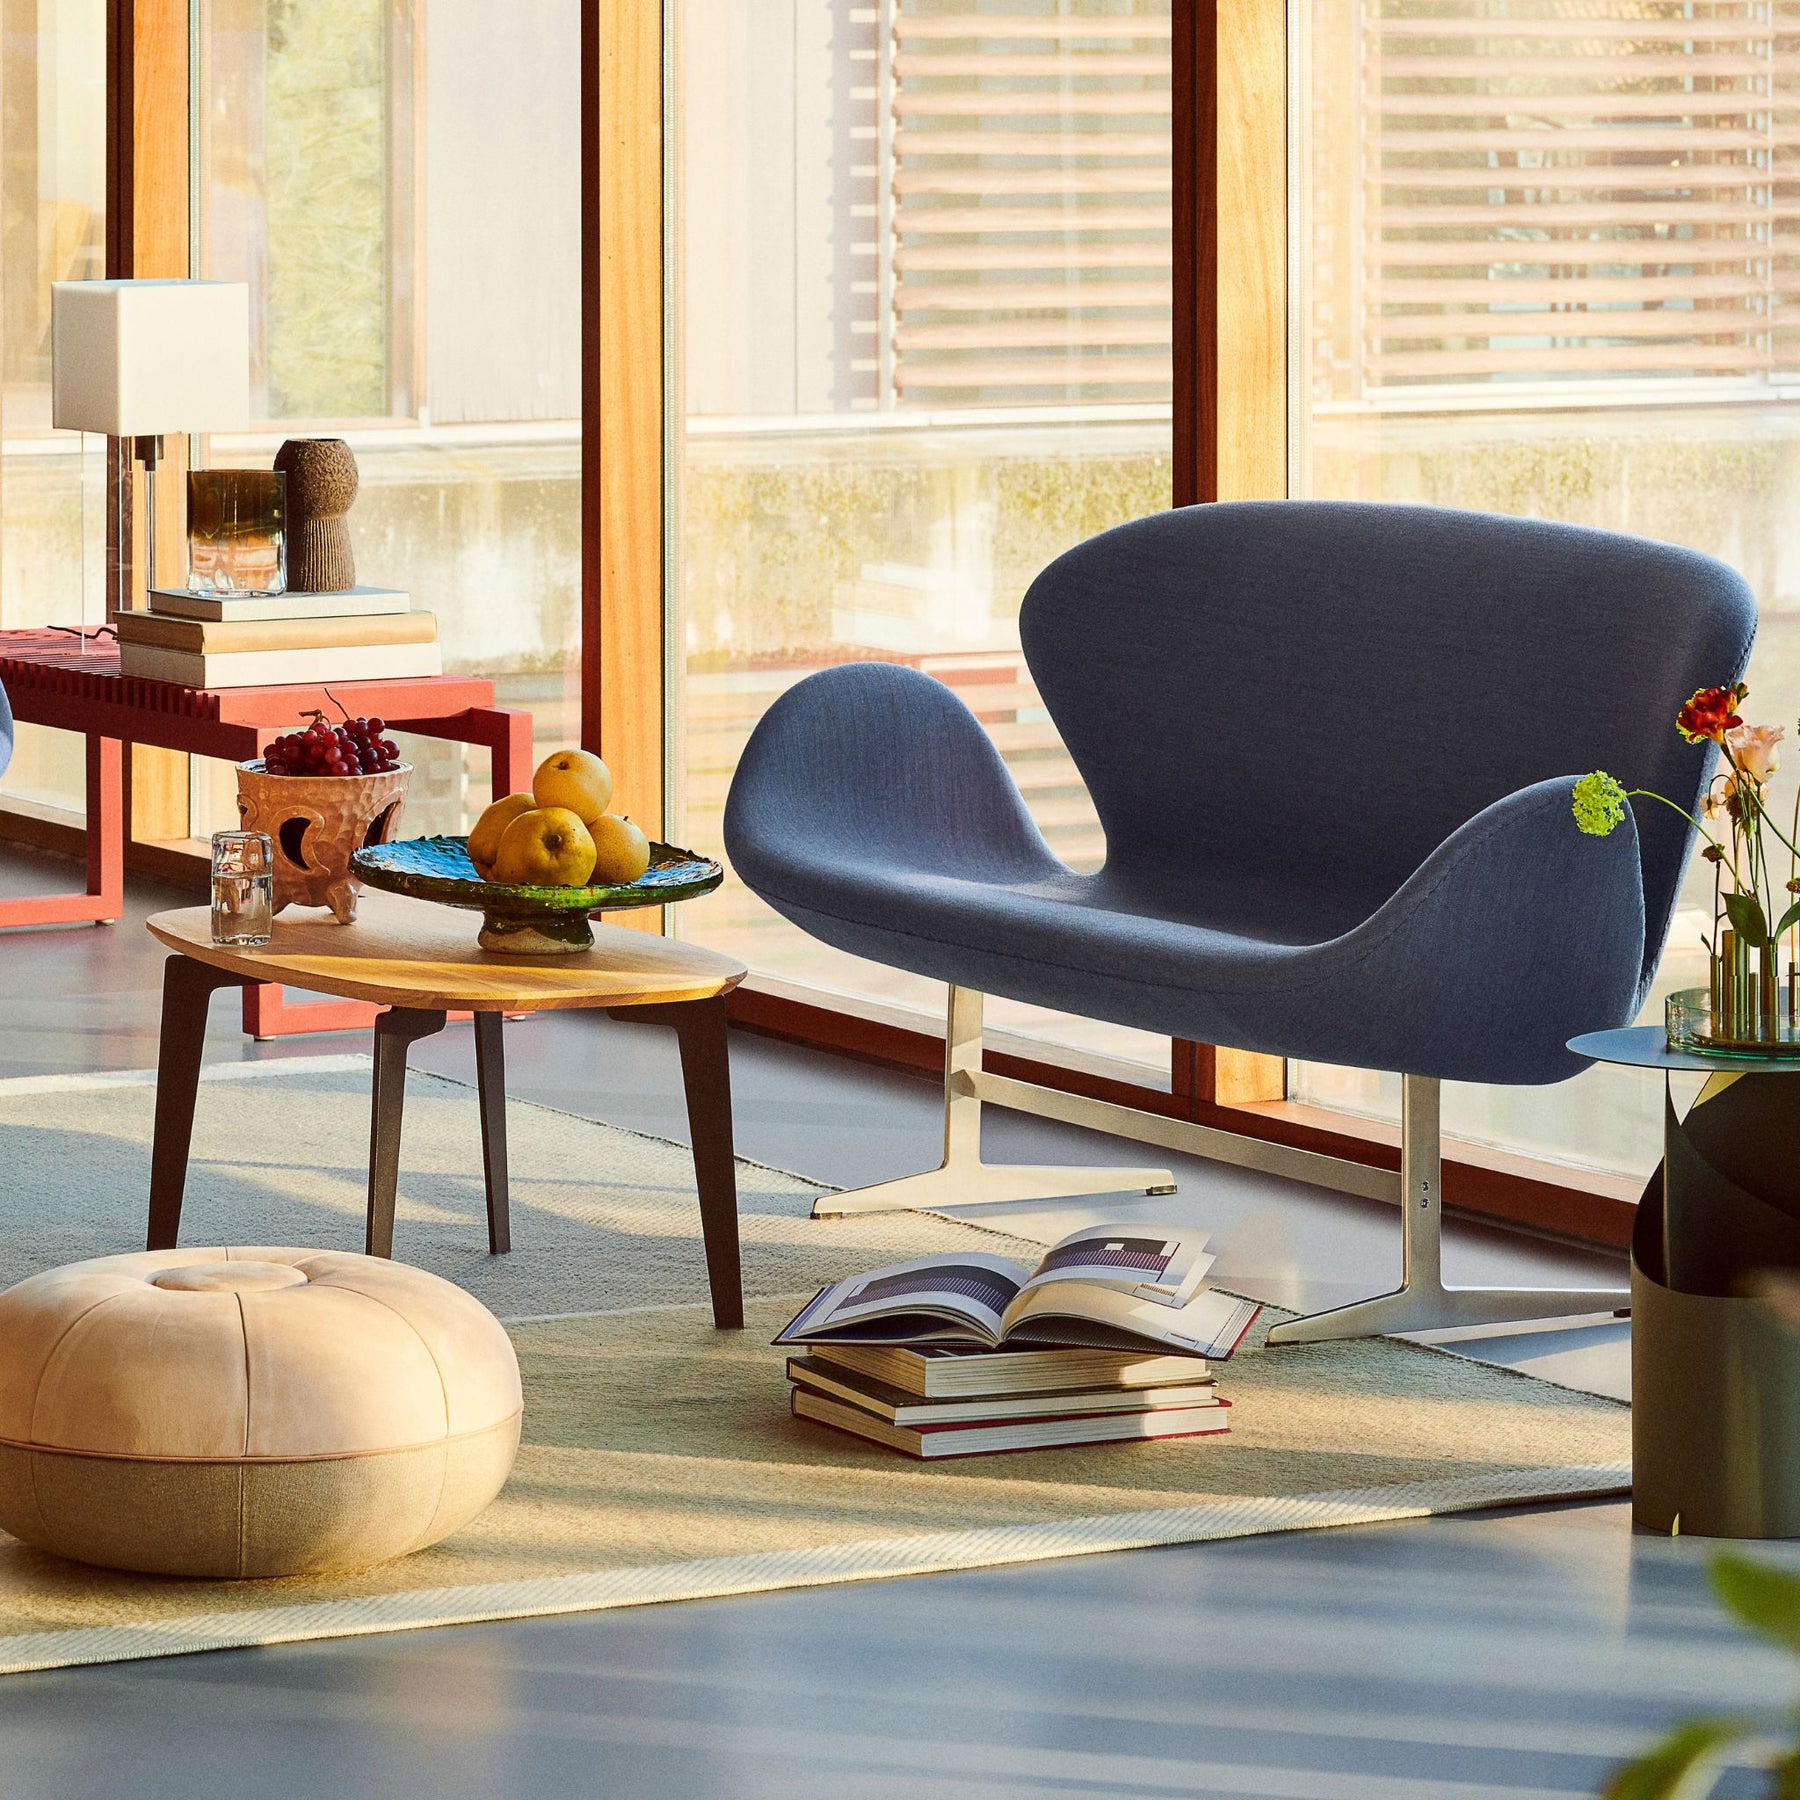 Fritz Hansen Join Coffee Table Small Oval Oak Clear Lacquer in room with Swan Sofa and Cecilie Manz Pouf